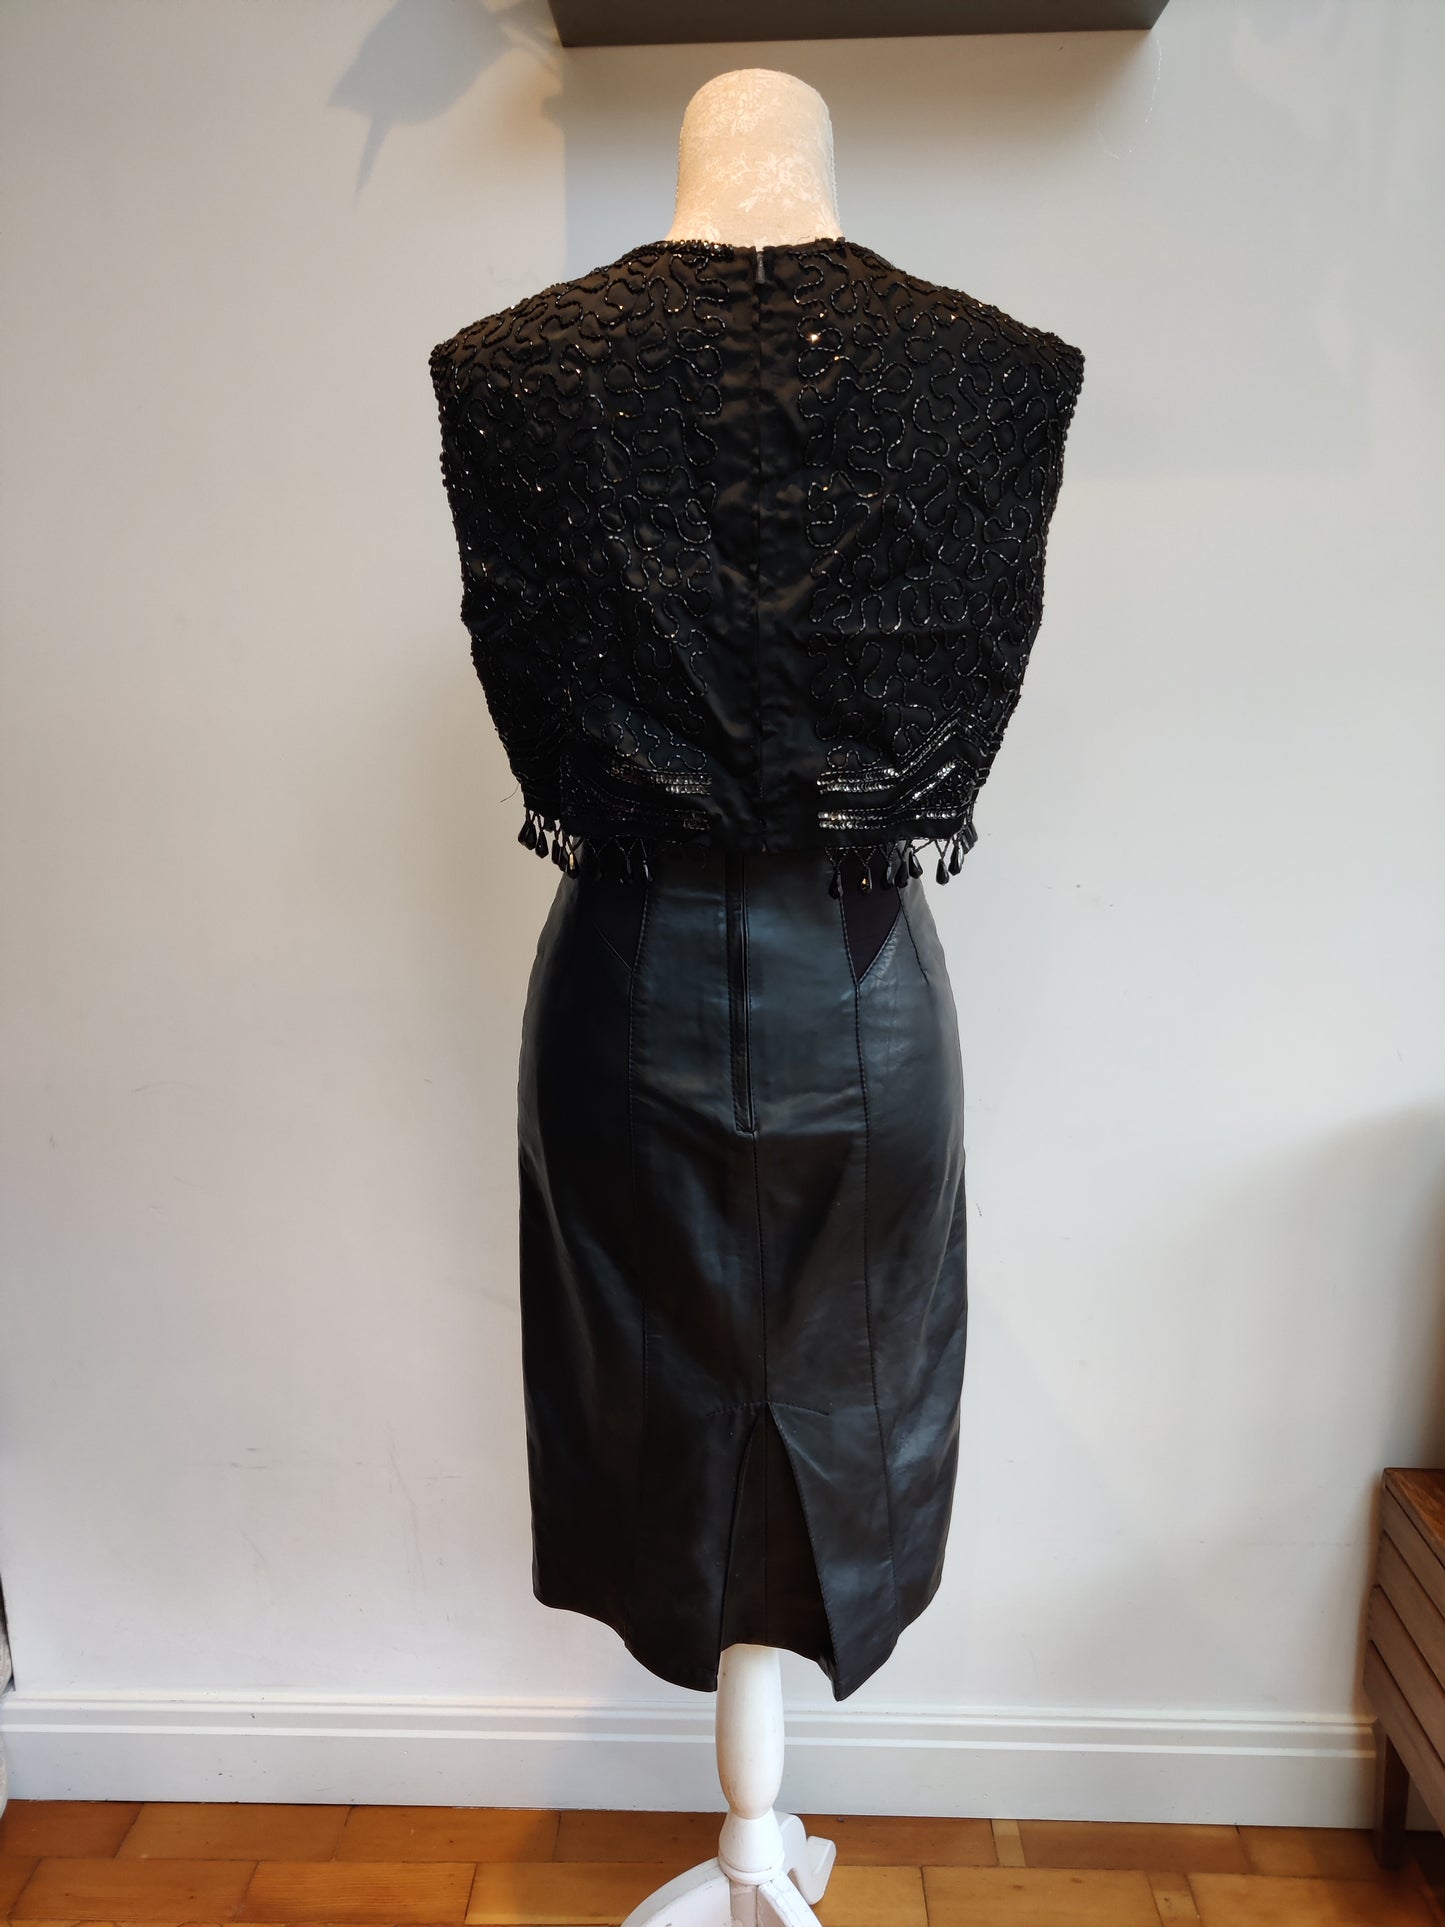 High waisted 80s leather pencil skirt. Size 6-8.